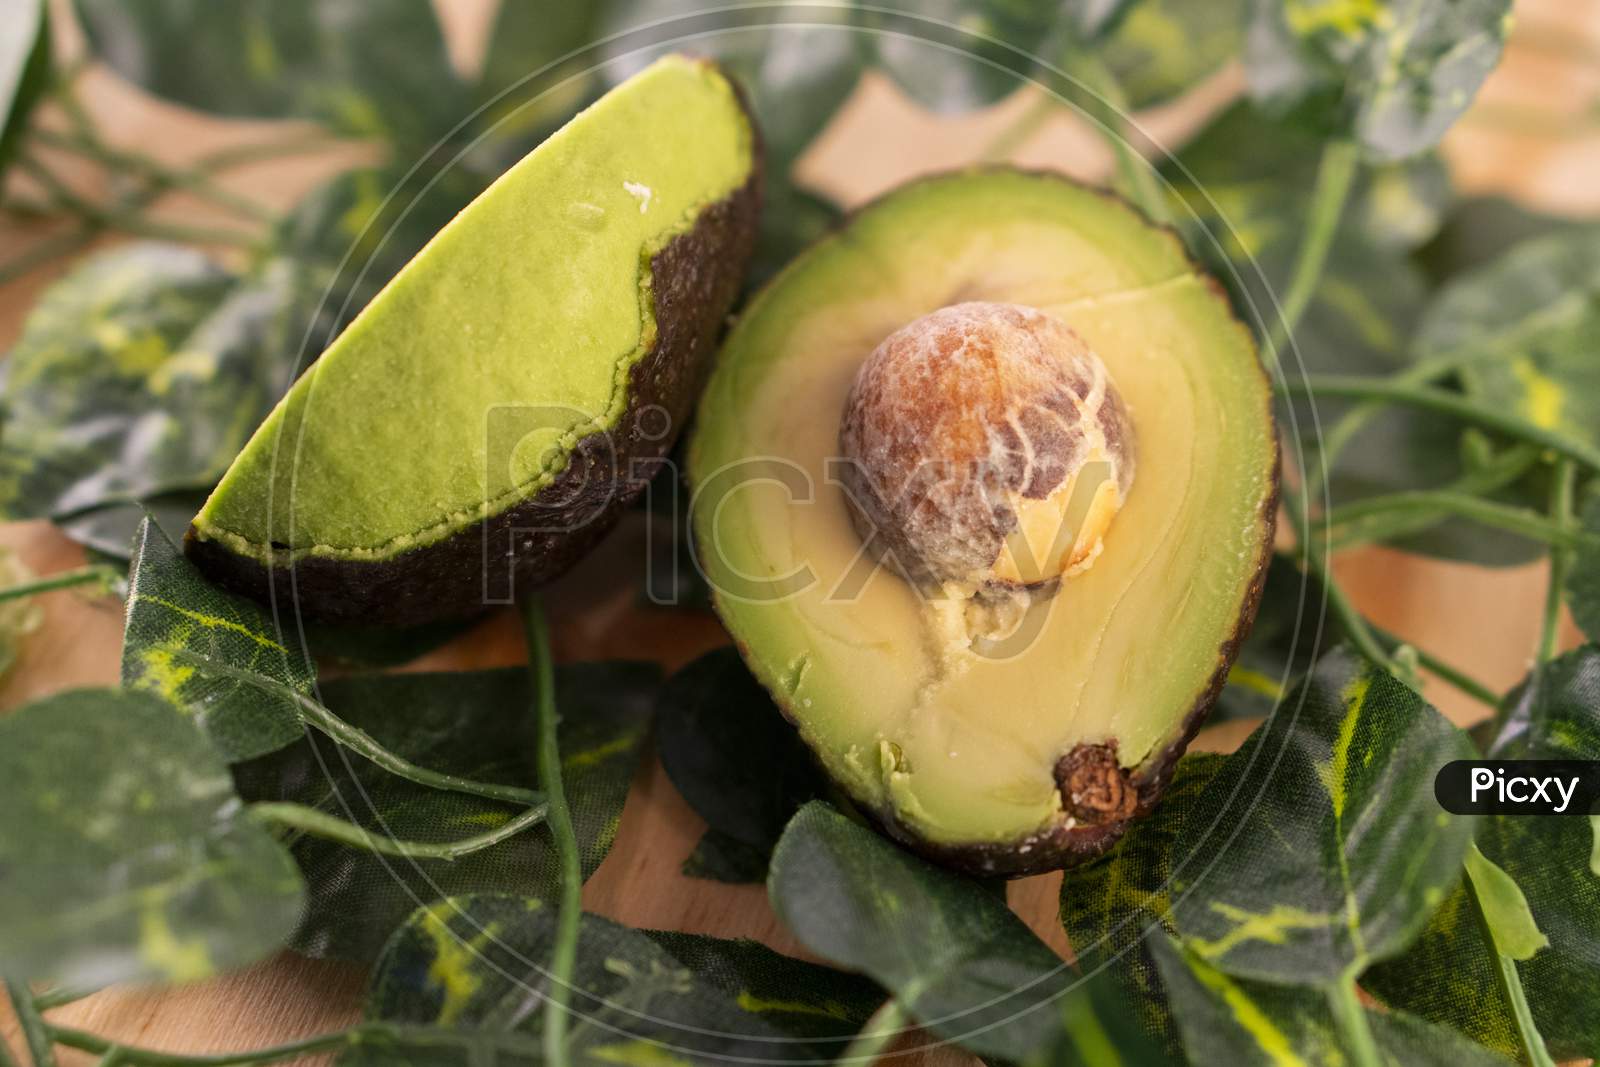 A sliced avocado with the seed